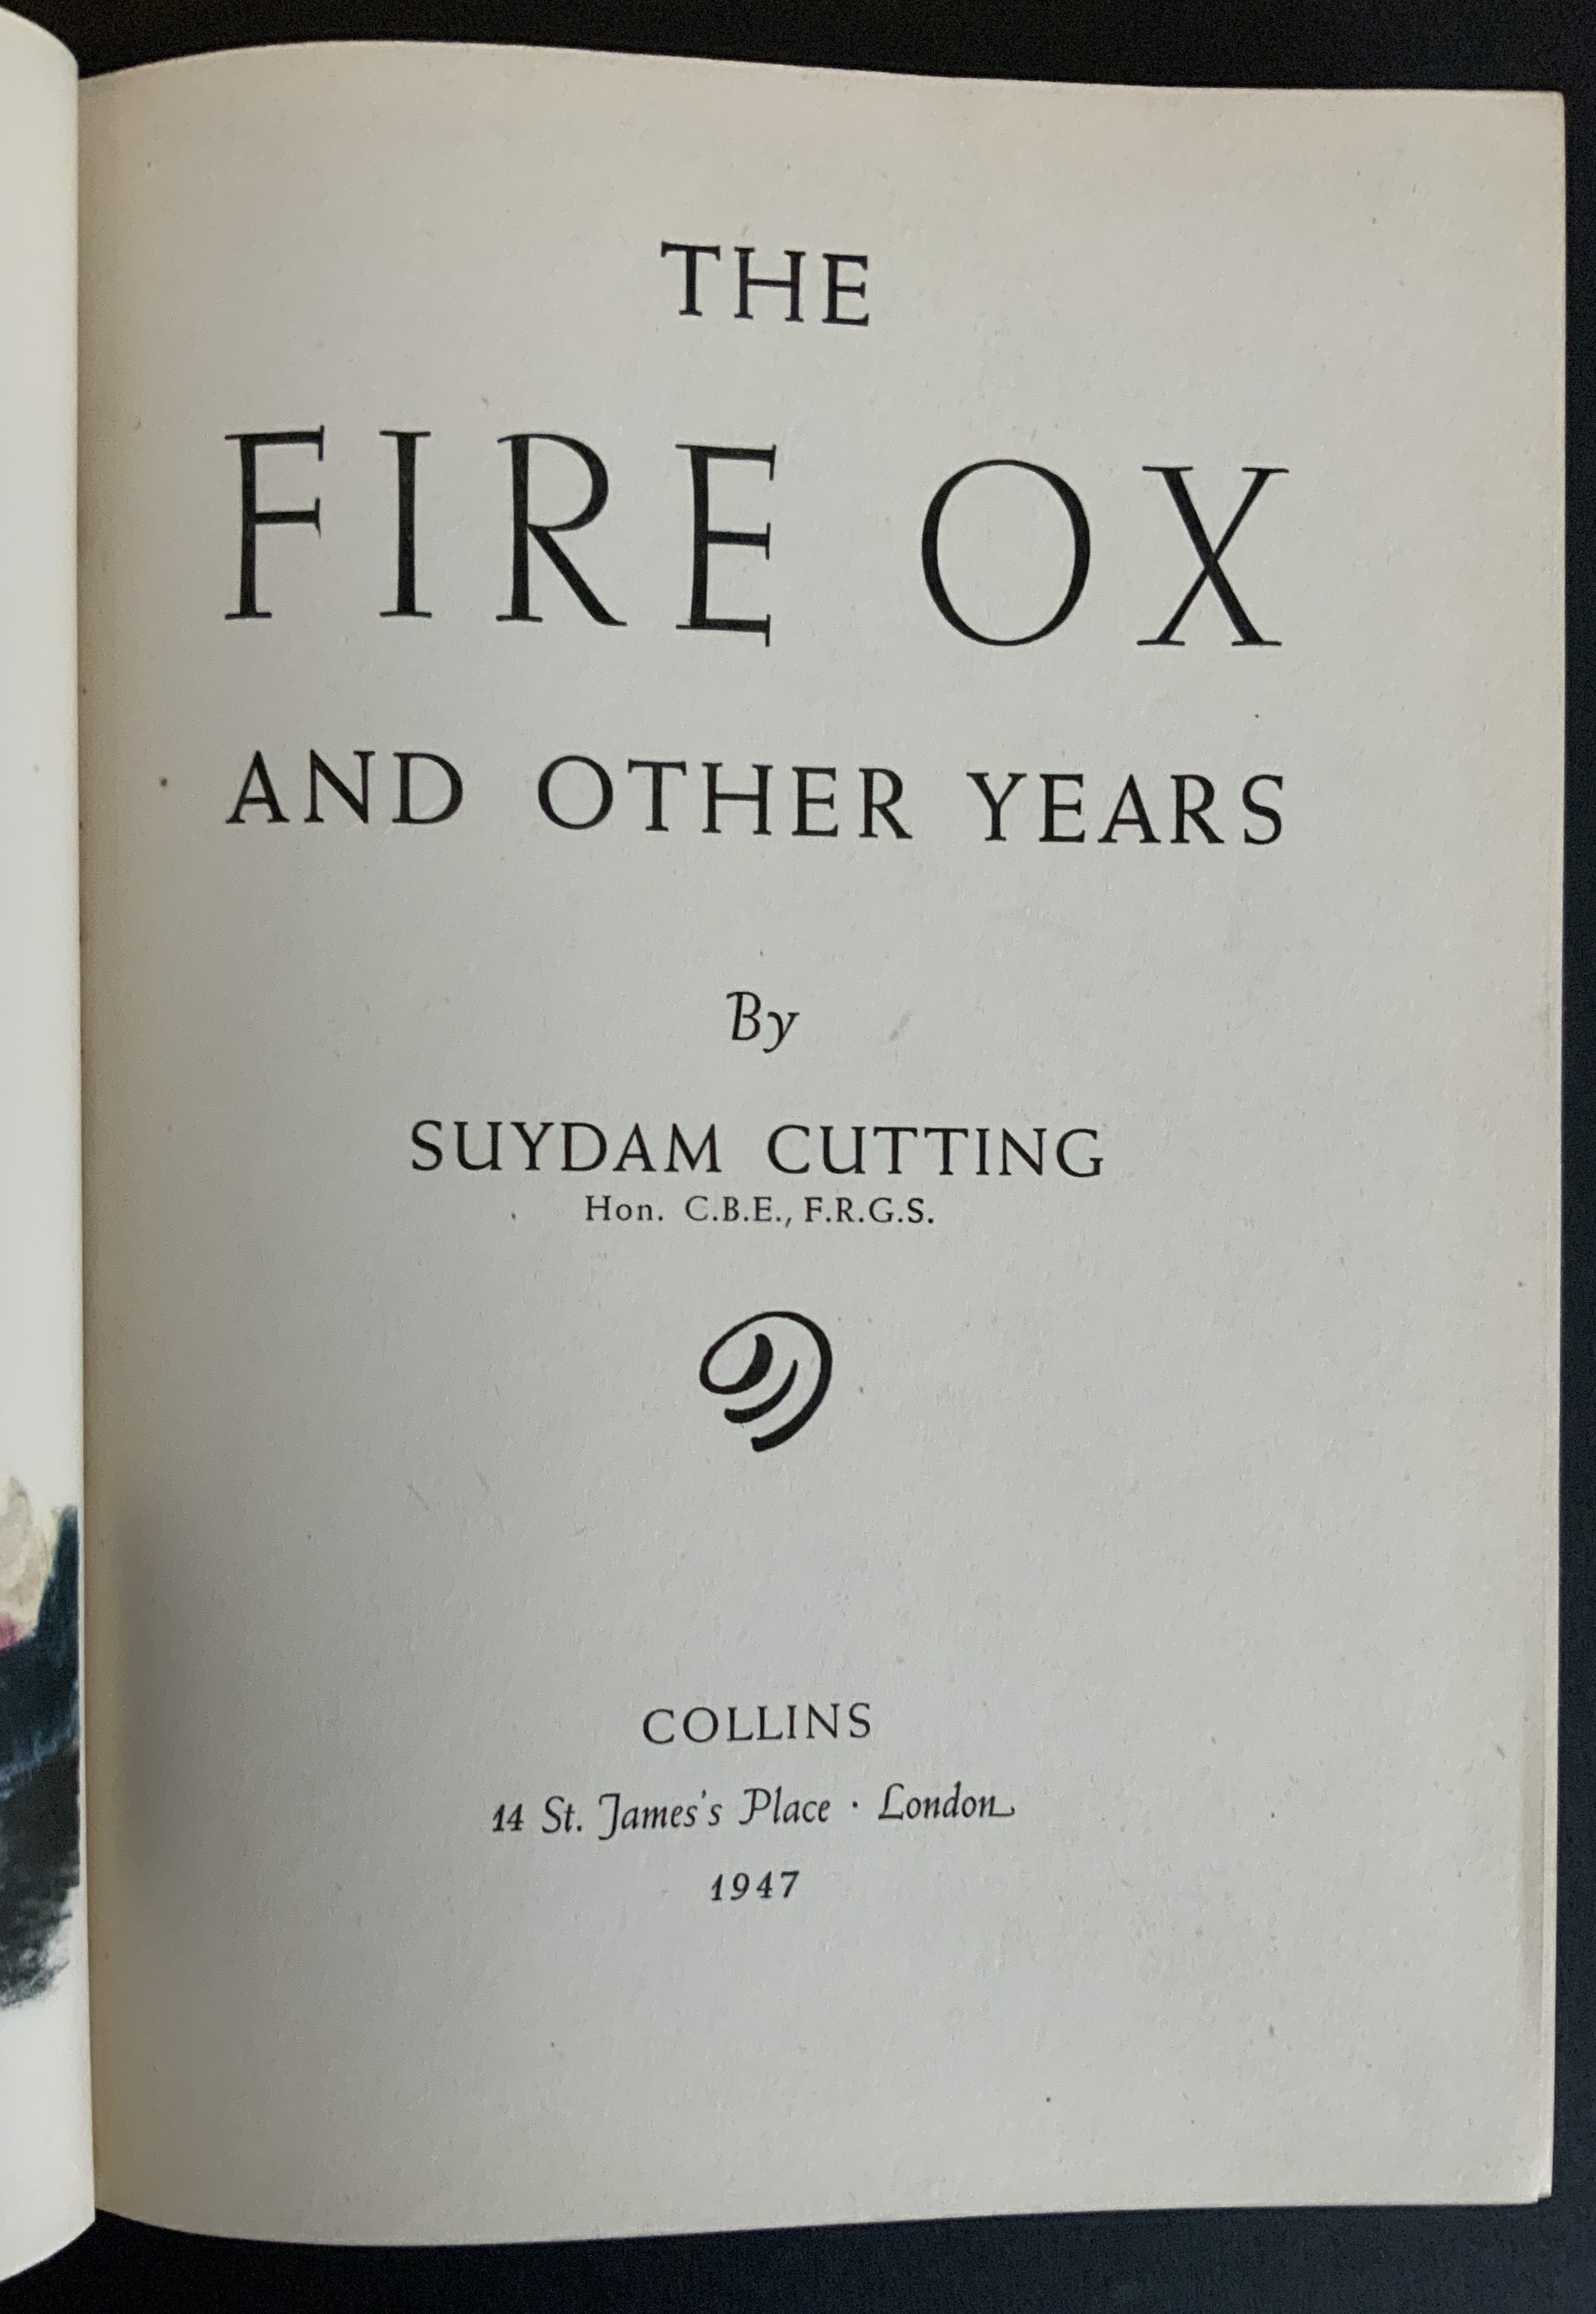 THE FIRE OX AND OTHER YEARS BY SUYDAM CUTTING